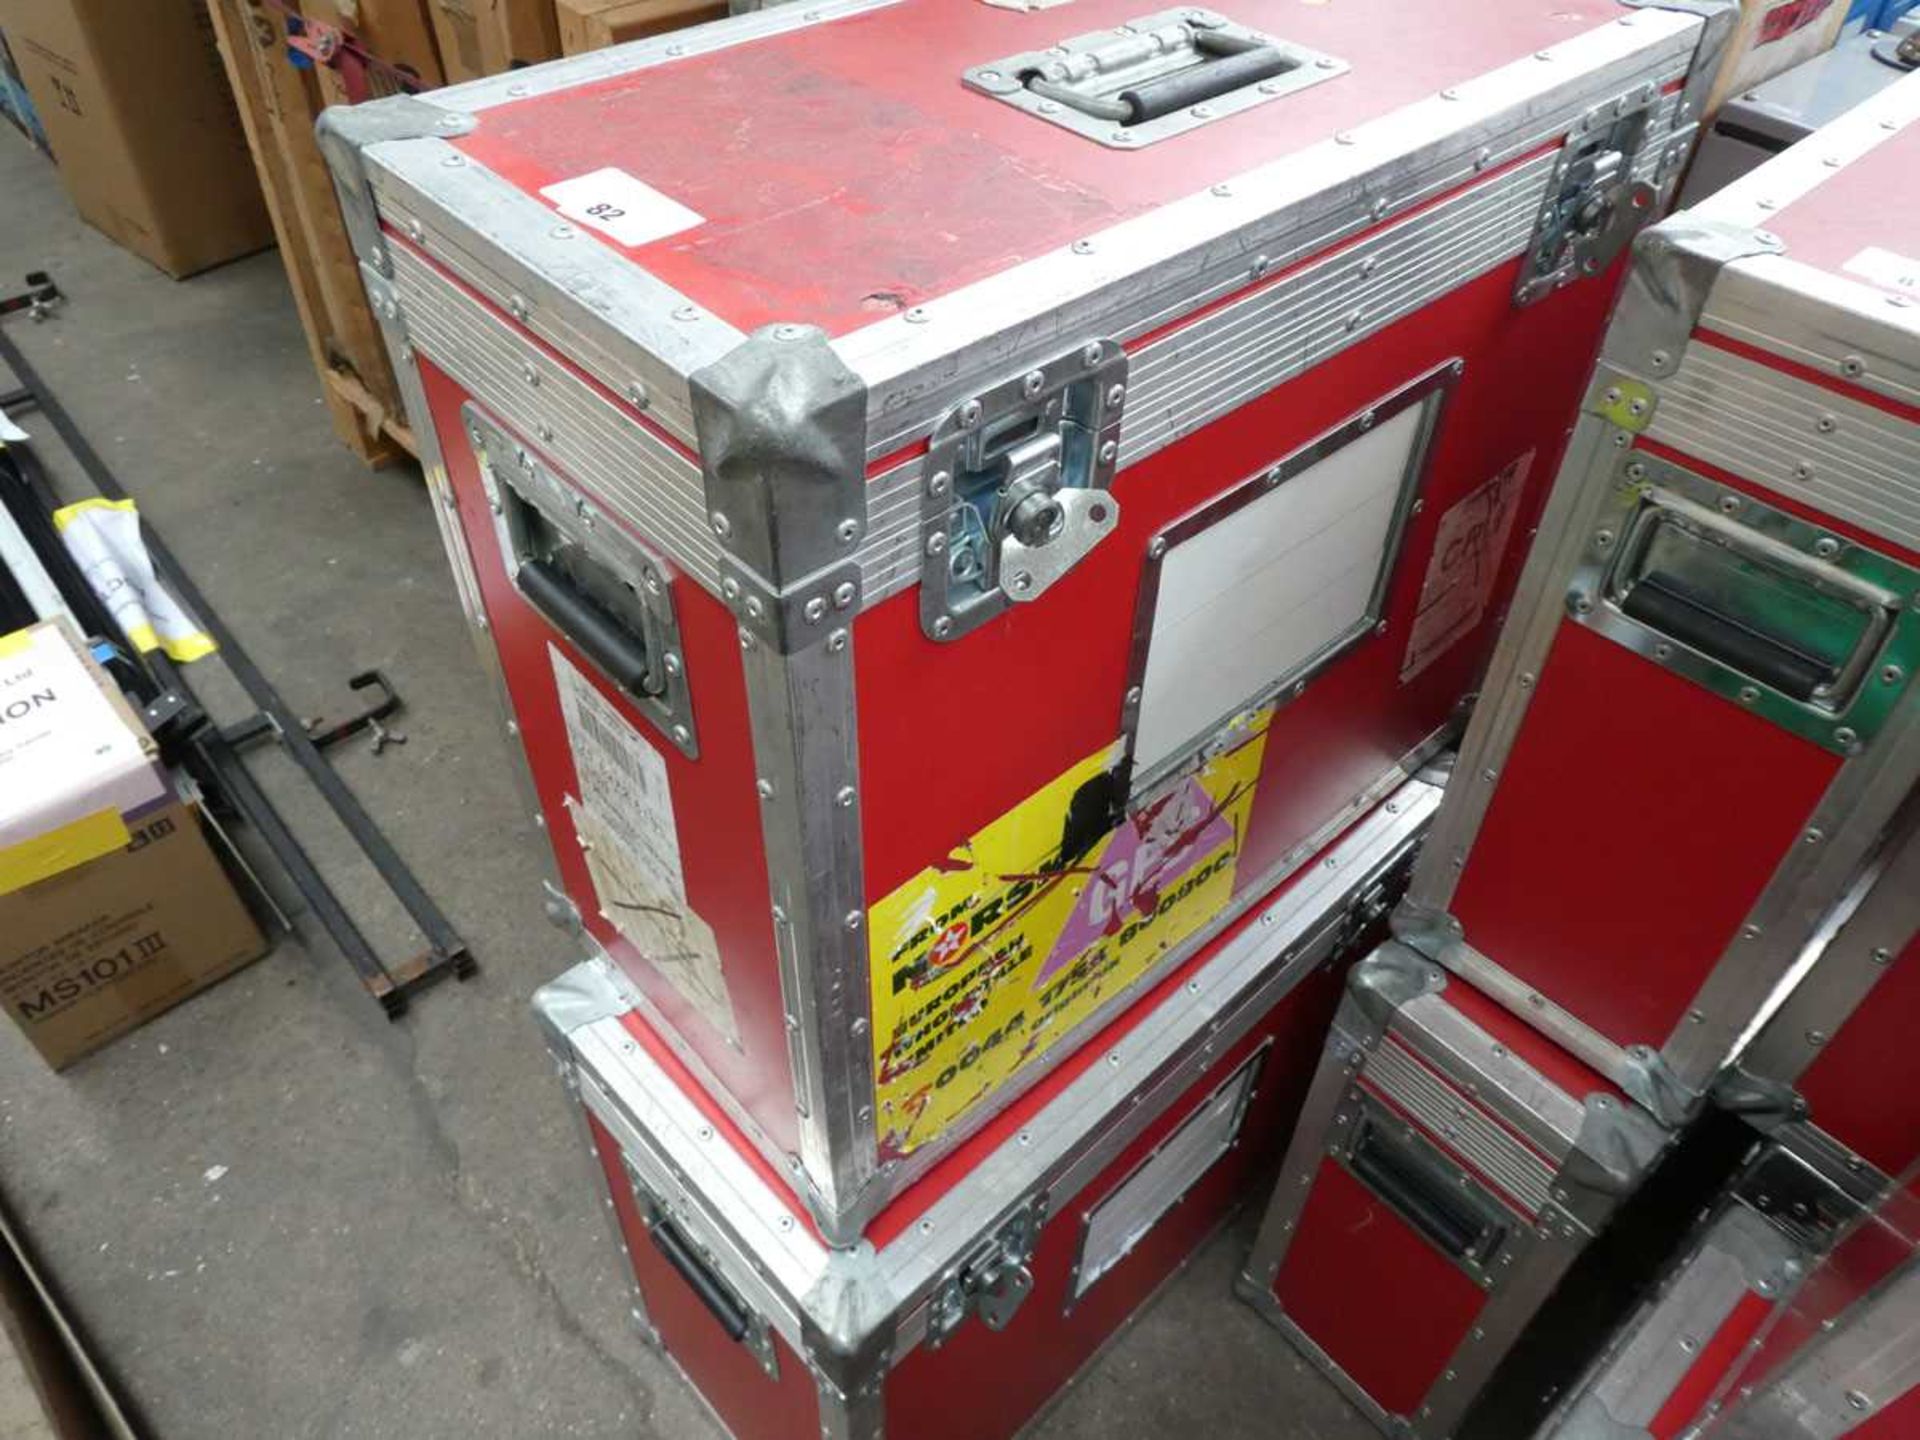 +VAT 2 top opening hinged padded flight cases in red each with a large monitor